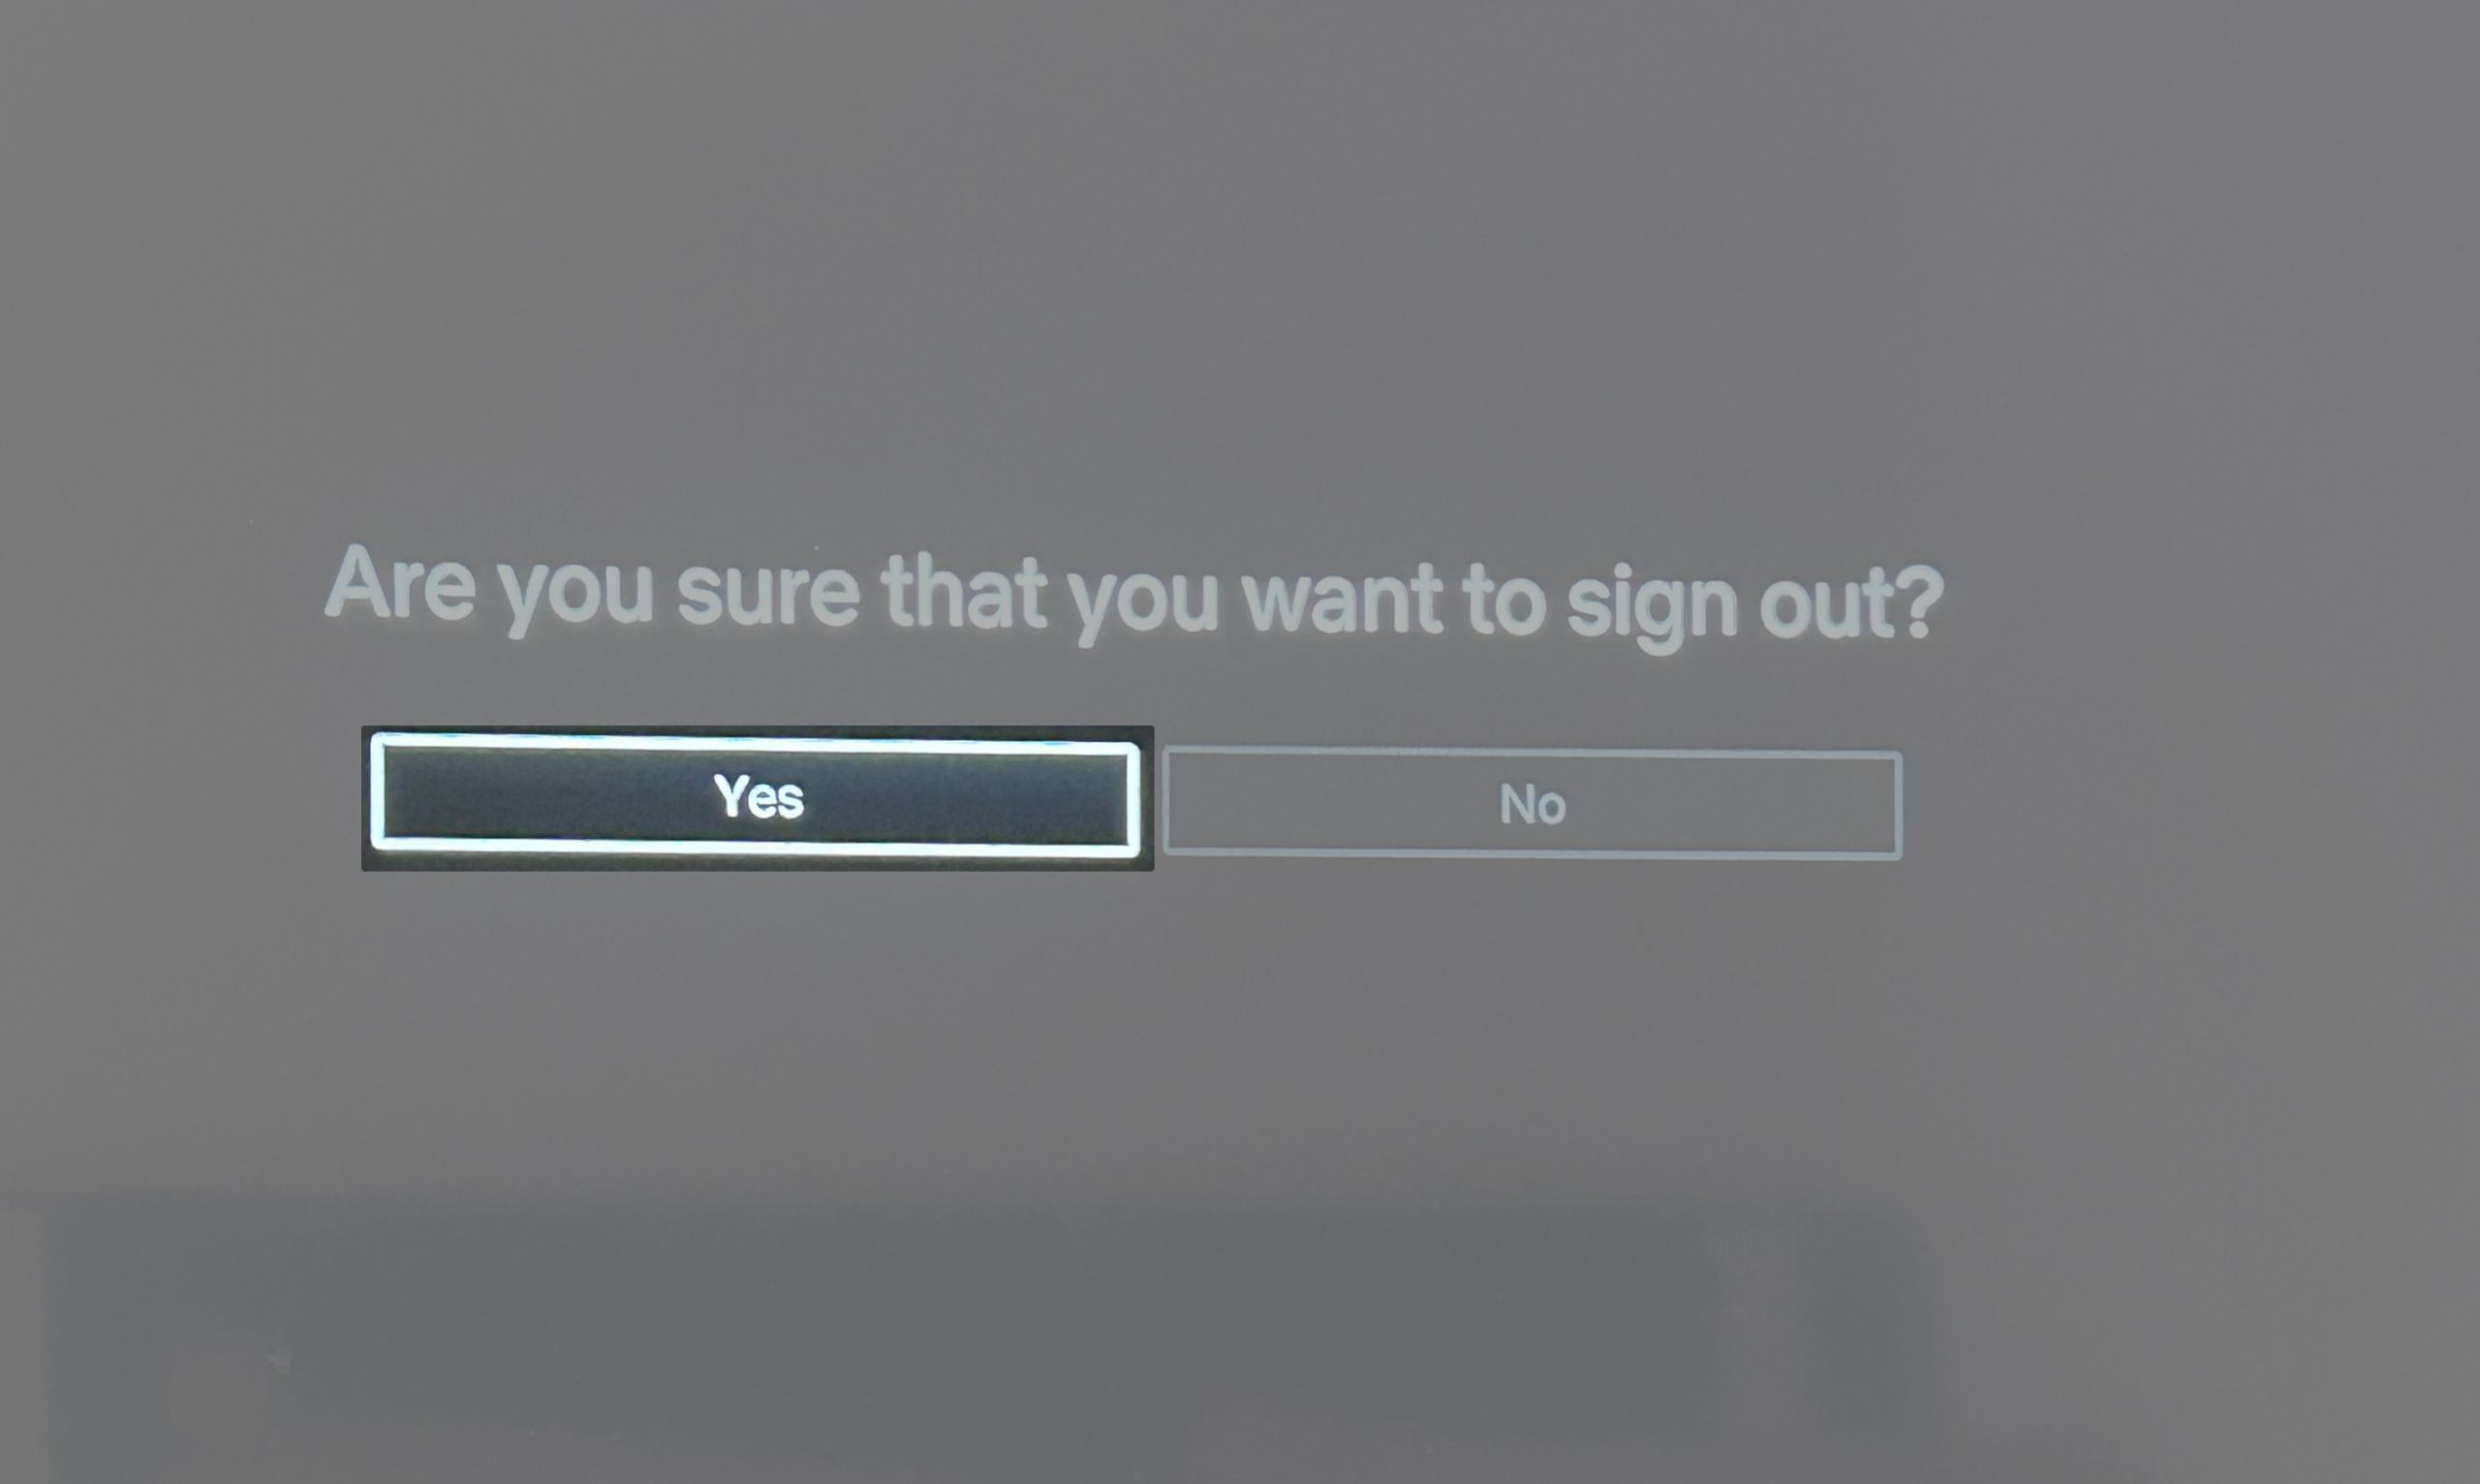 Yes to Sign out from Netflix on Smart TV